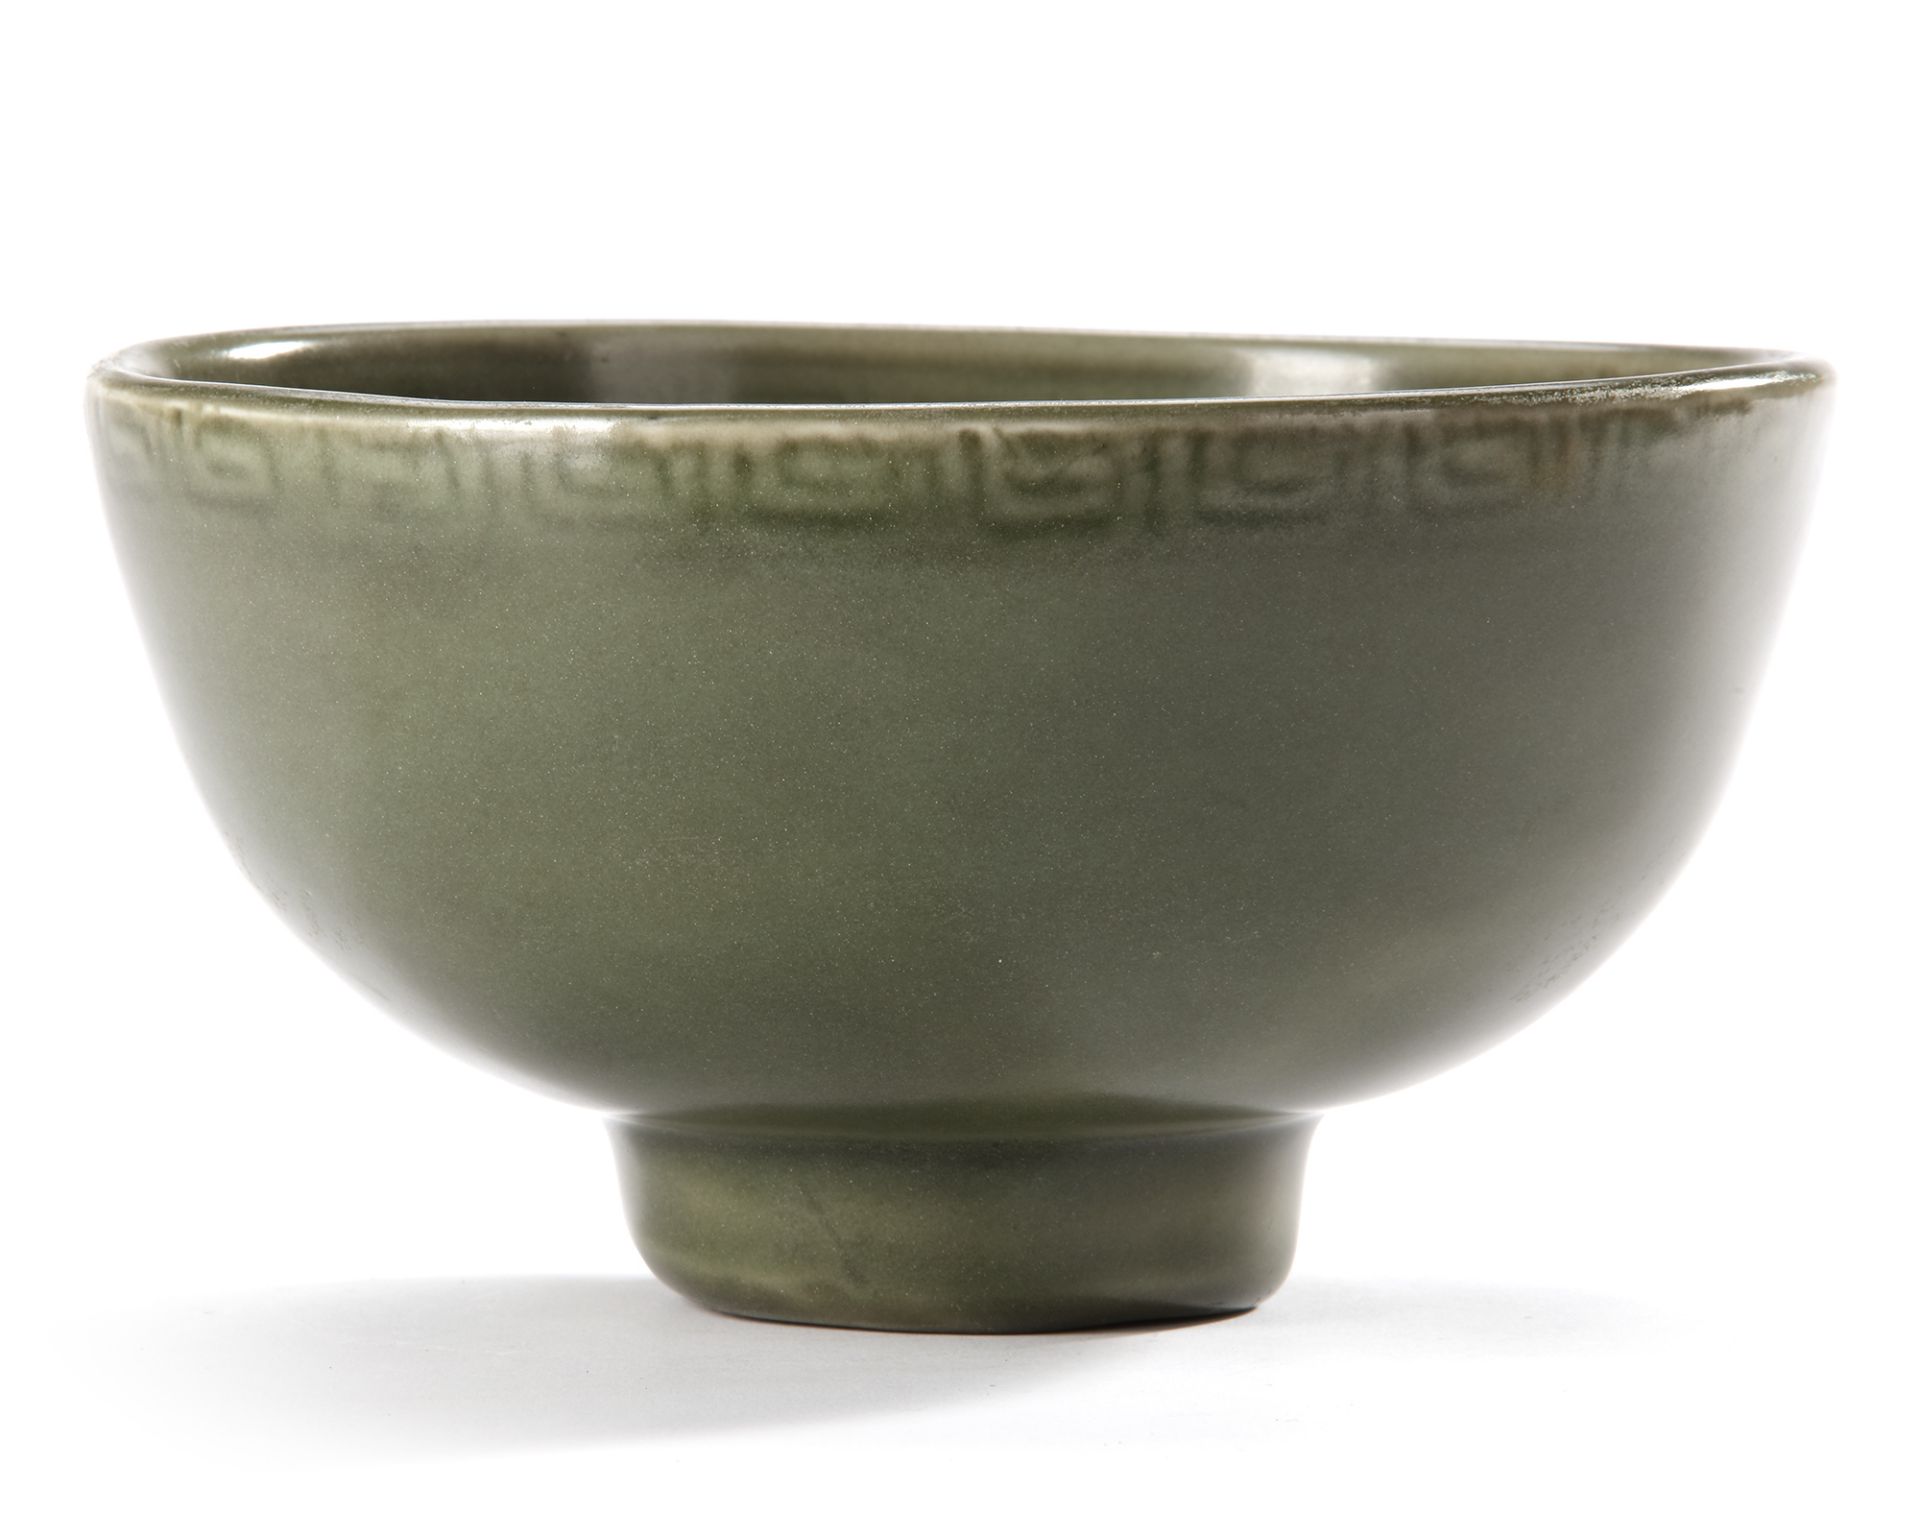 A CHINESE LONGQUAN IMPRESSED BOWL, MING DYNASTY (1368-1644) - Image 5 of 8